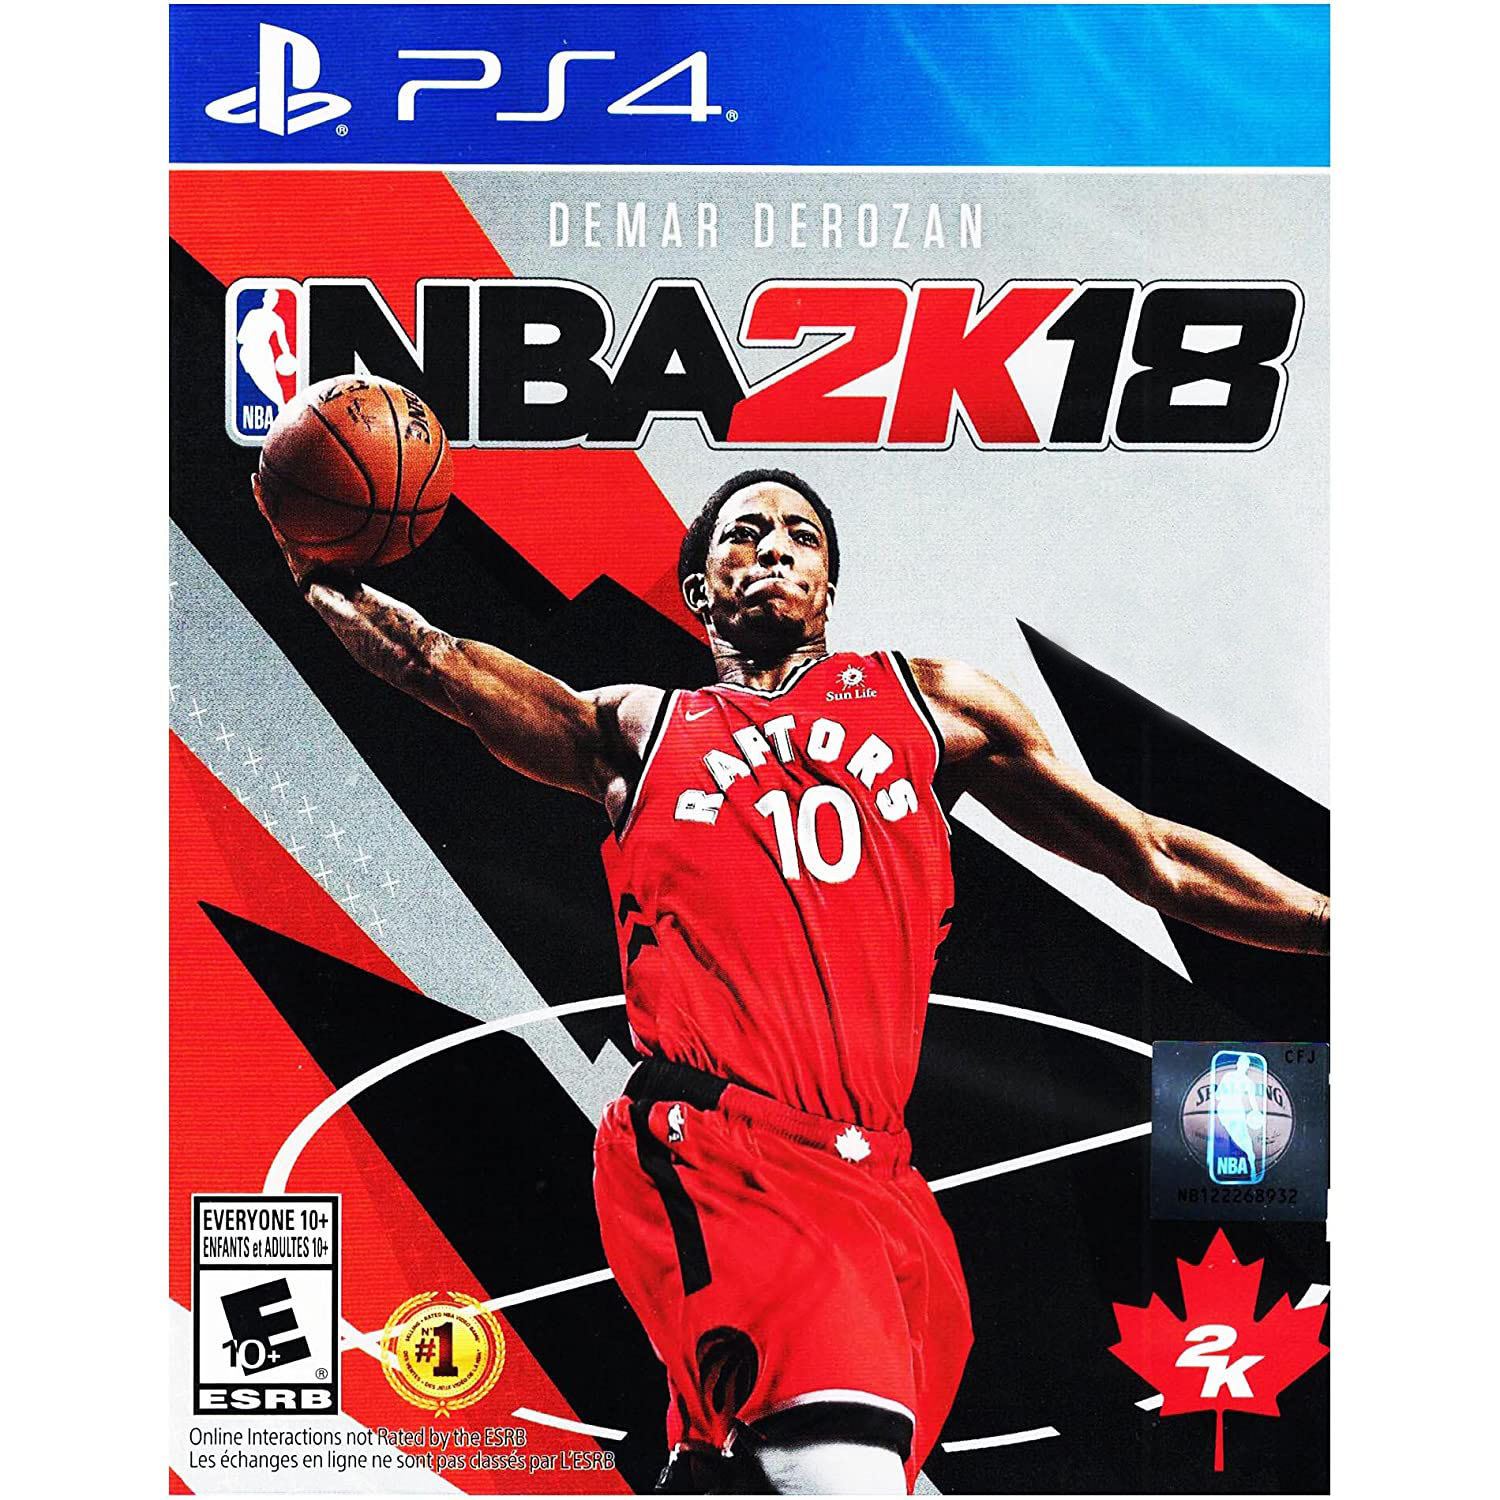 NBA 2K18 (Canadian Cover) for PlayStation 4